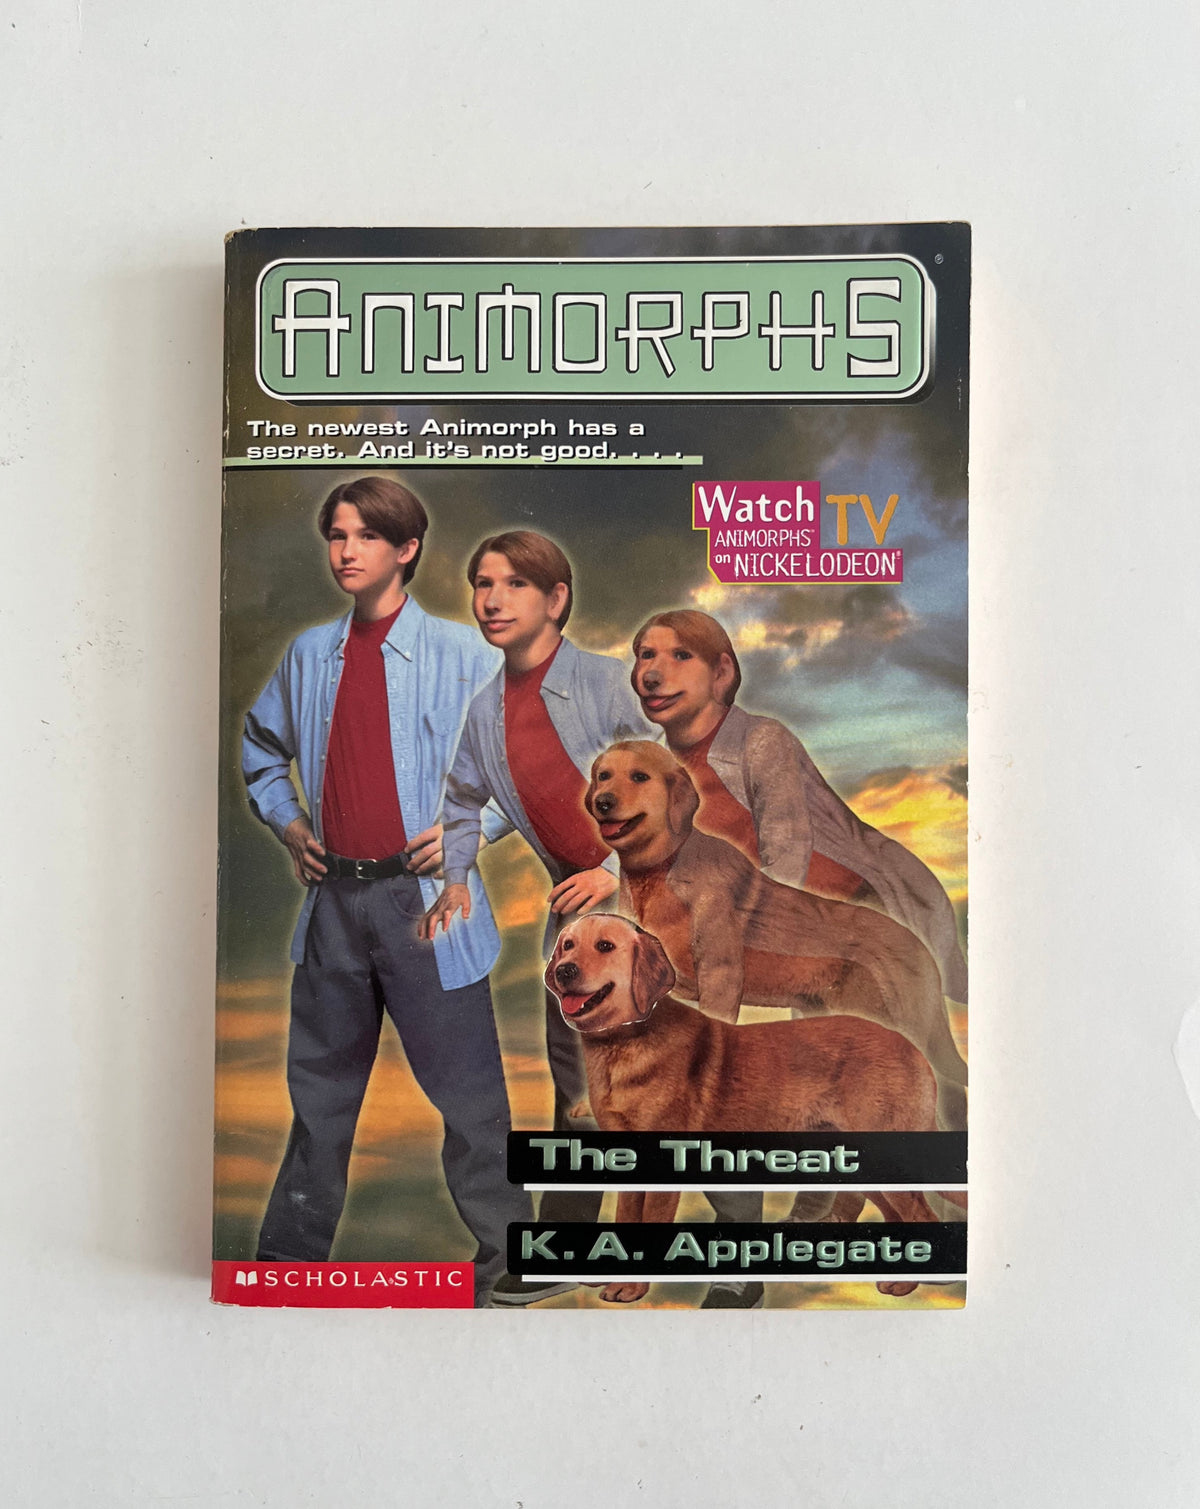 Animorphs: The Threat by K.A. Applegate